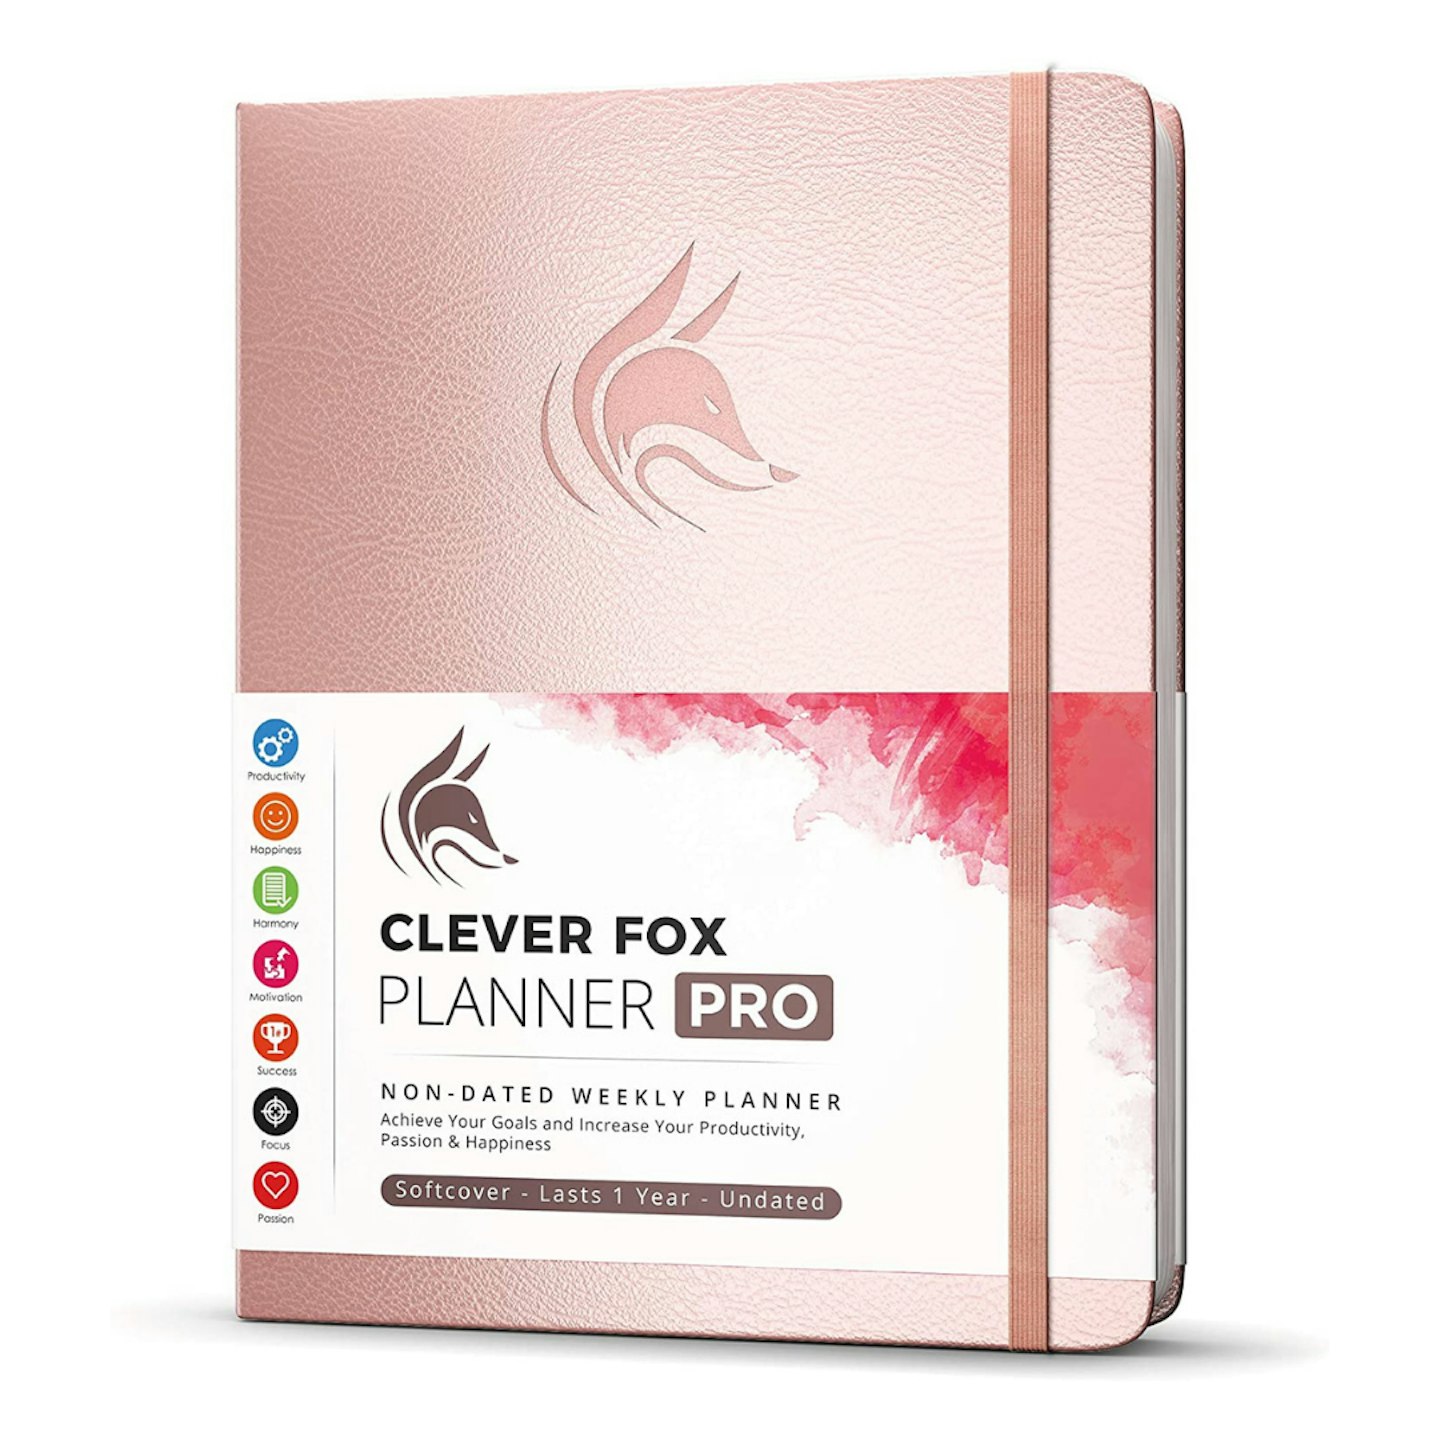 Be Clever Fox Print – Roseberry & Co.